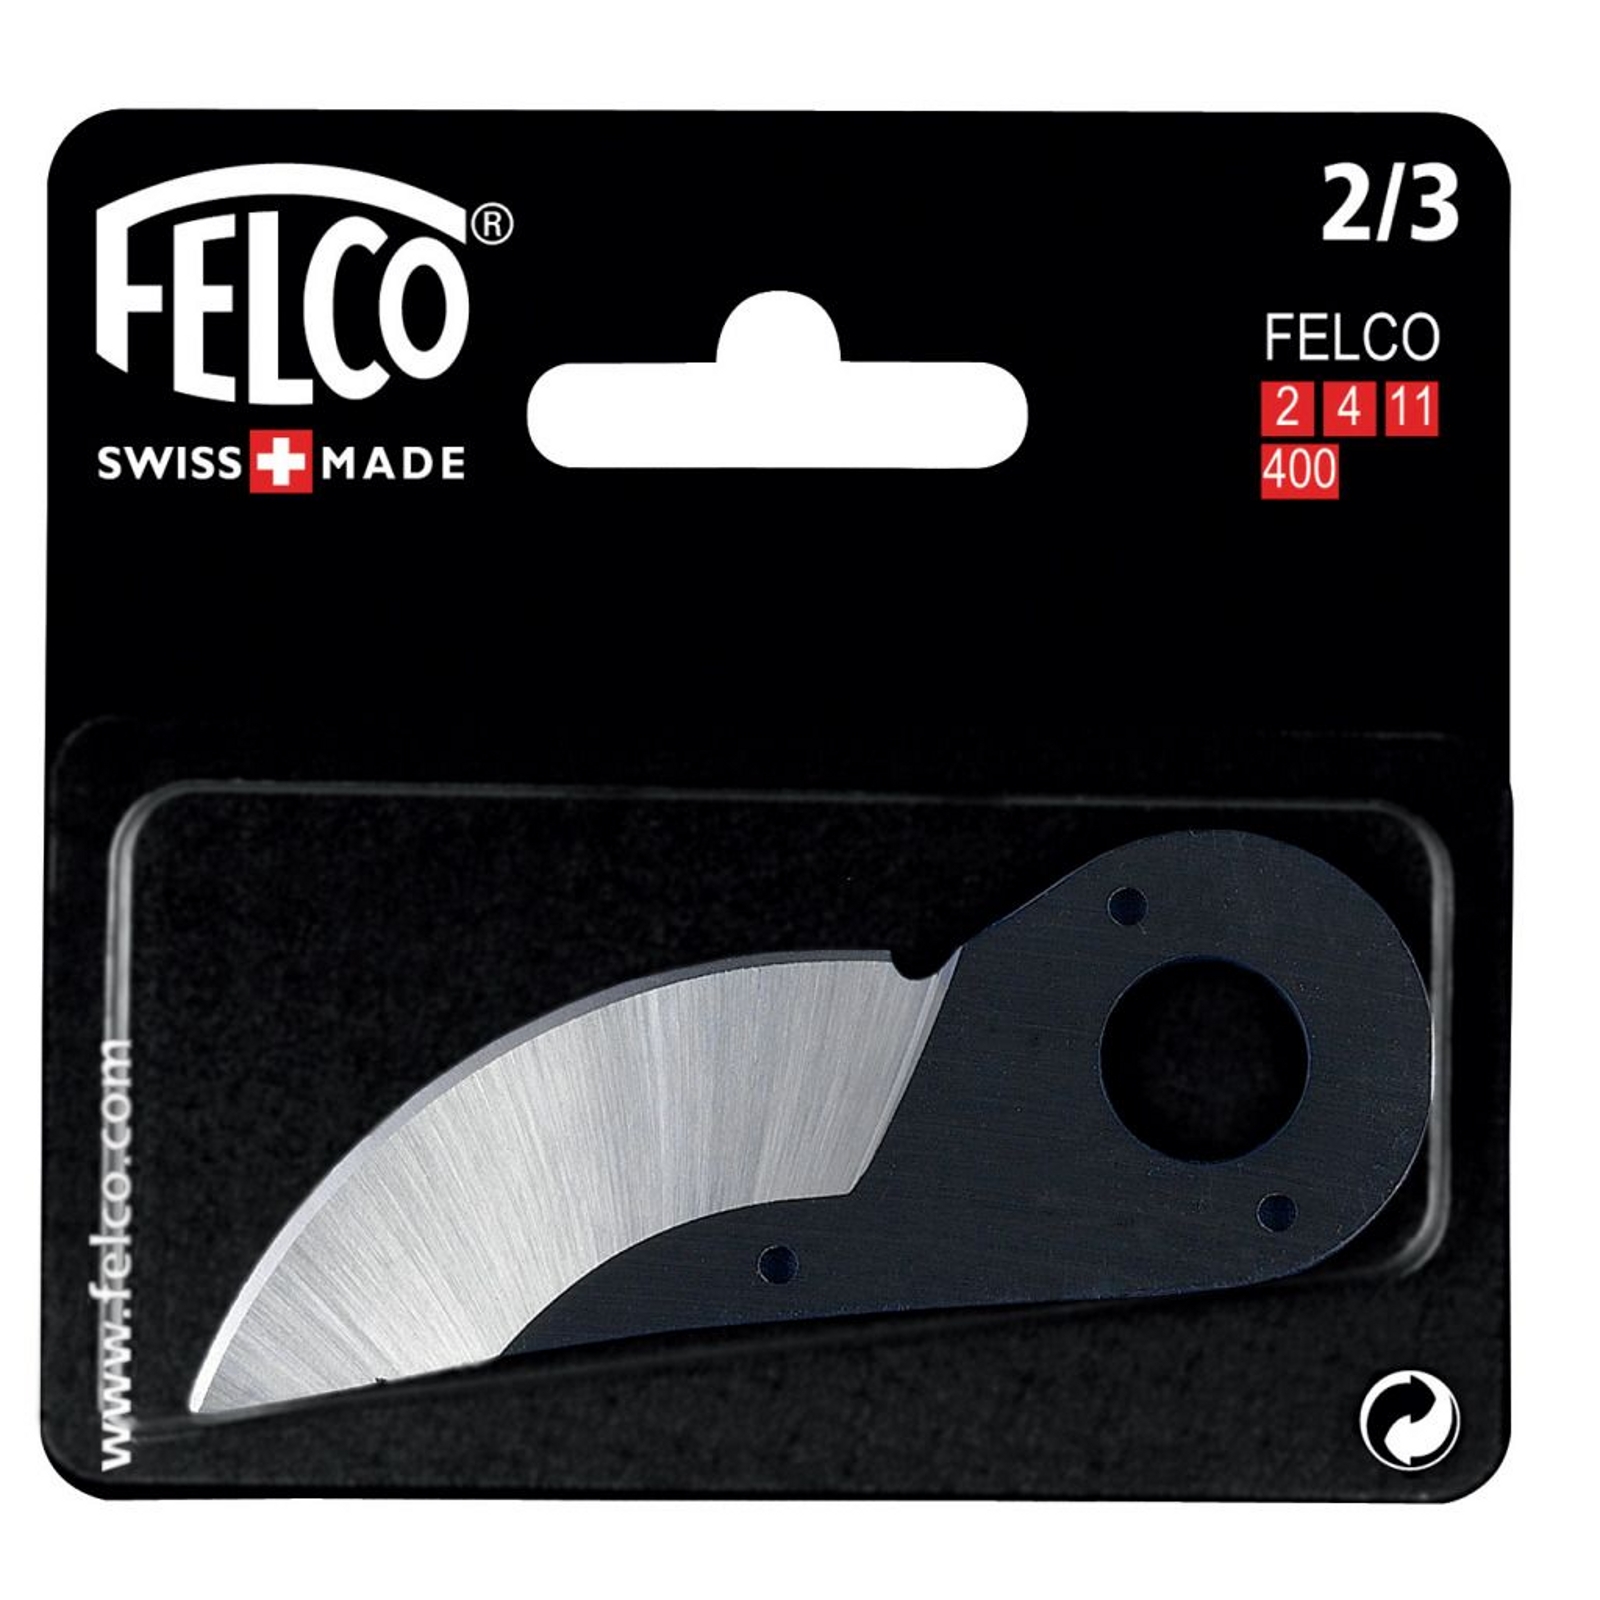 FEL23 Felco Replacement Blade for F-2 Pruining Shear